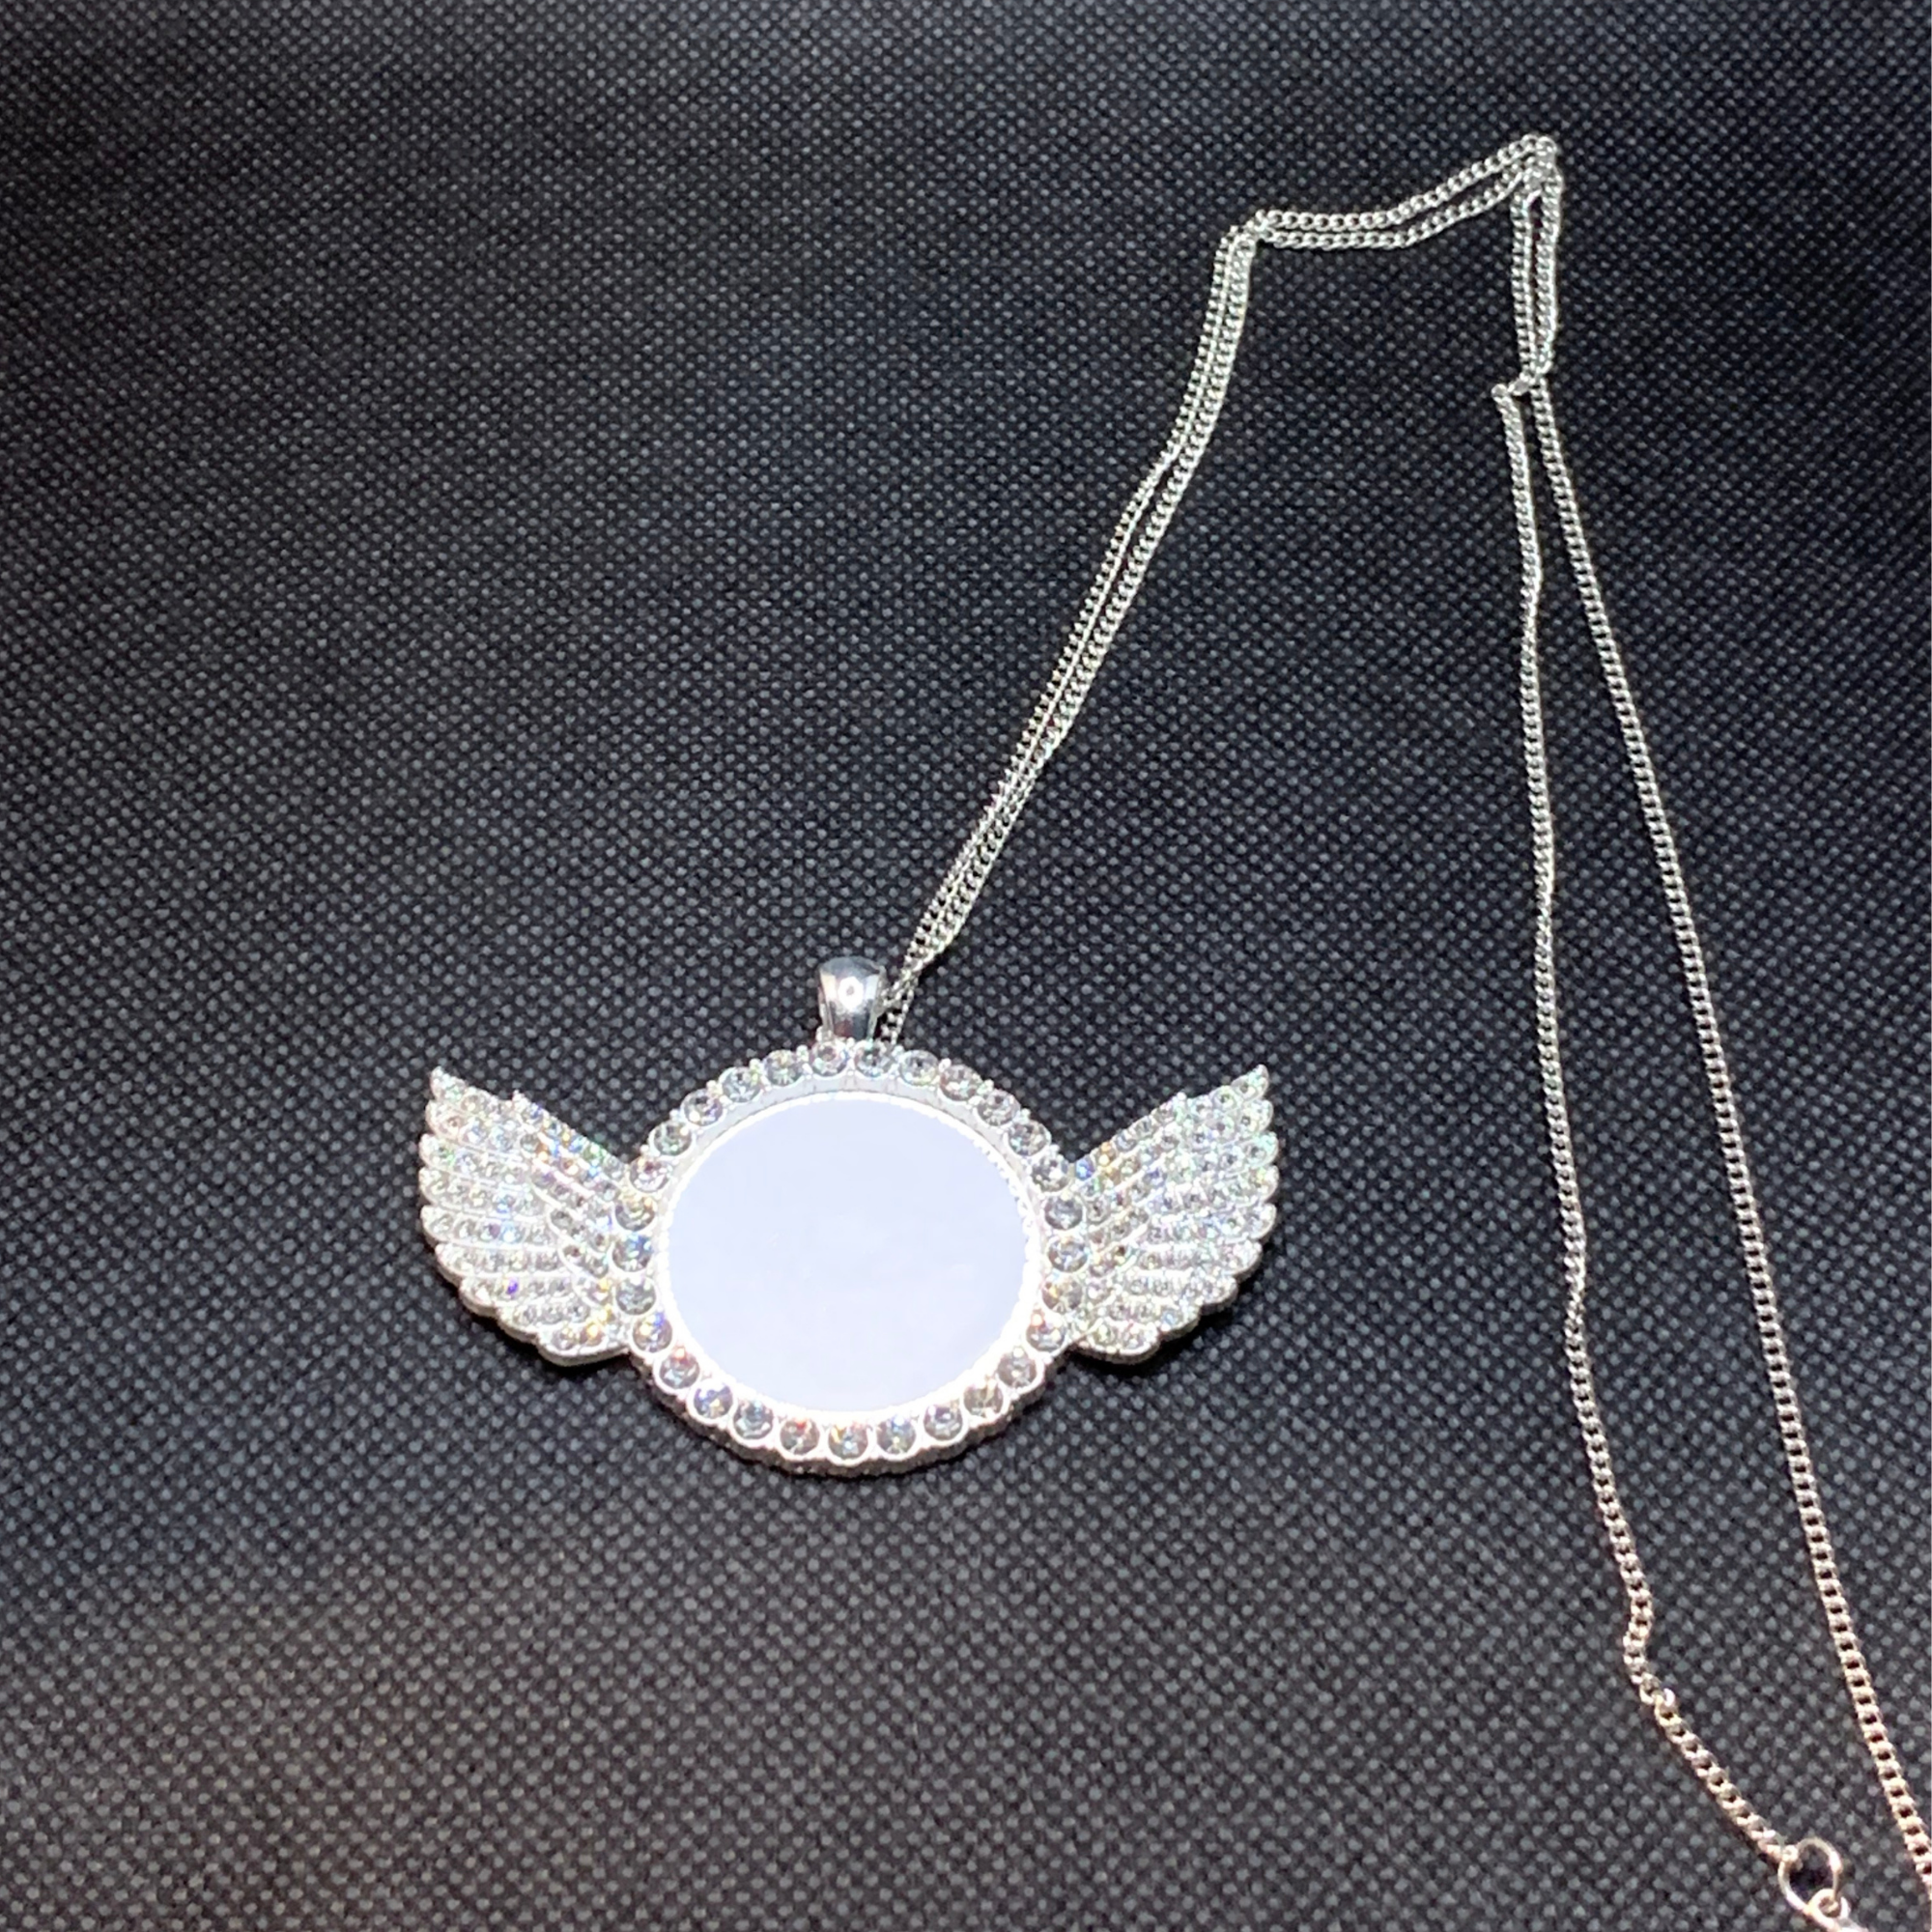 Customized Angel Wing Charm Necklace